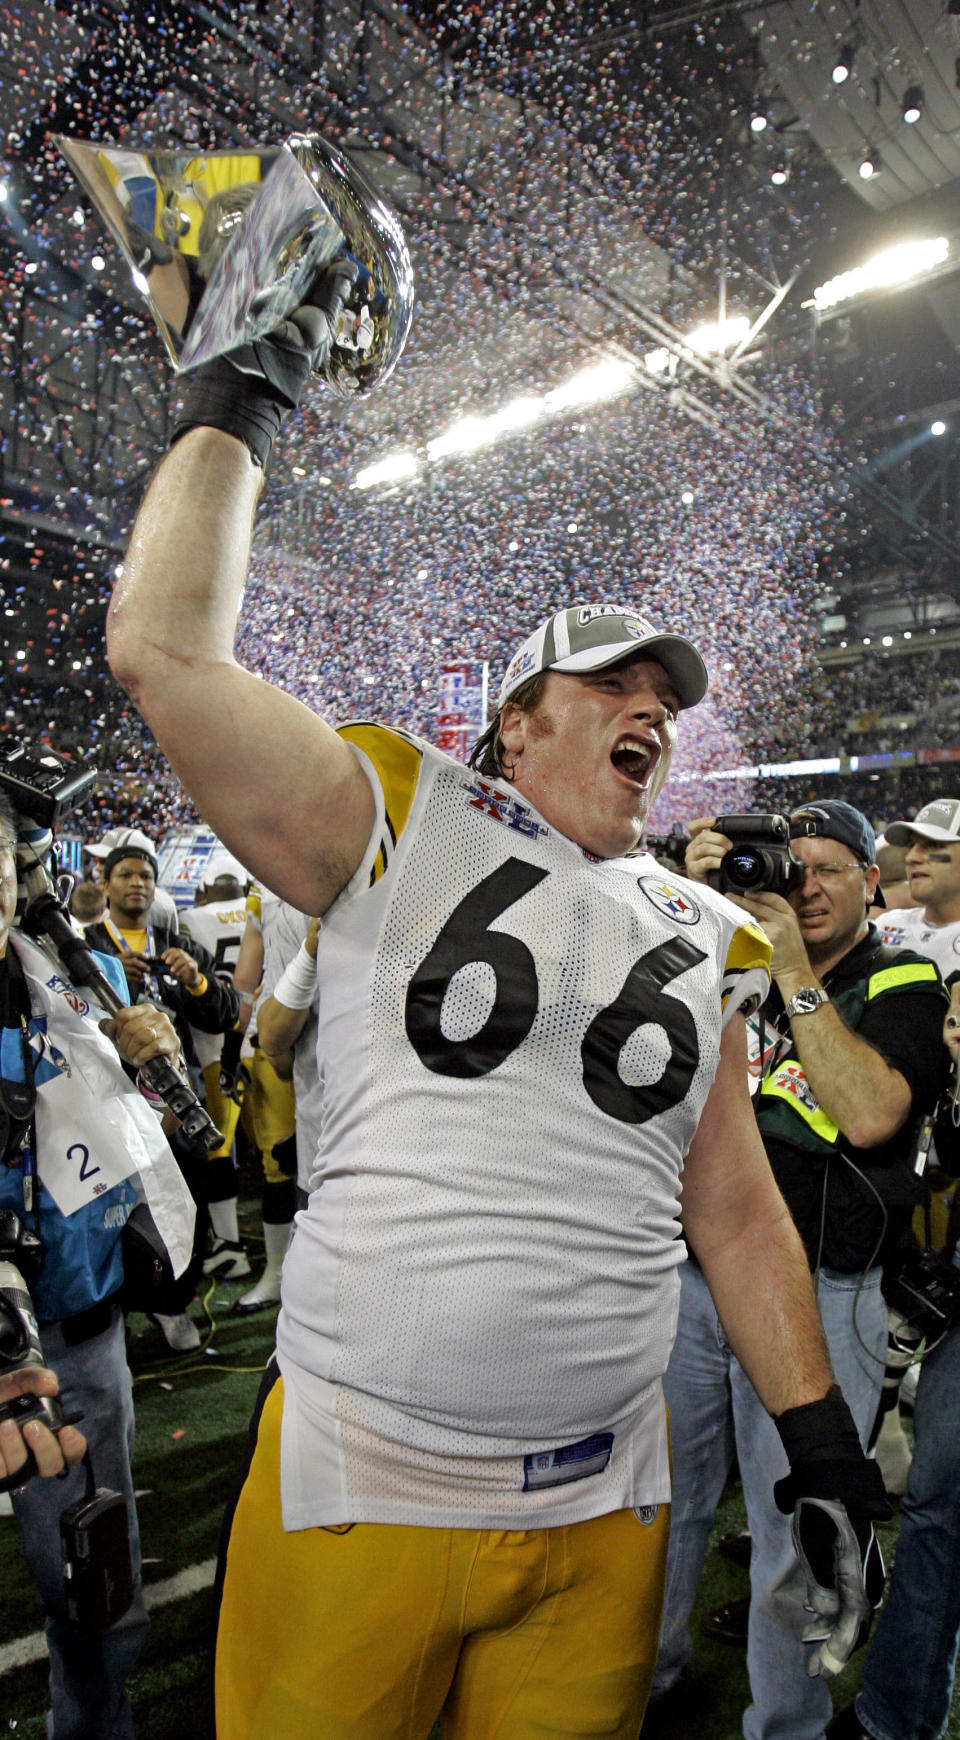 FILE - In this Feb. 5, 2006, file photo, Pittsburgh Steelers' Alan Faneca holds up the Vince Lombardi Trophy after defeating the Seattle Seahawks, 21-10, in the Super Bowl 15 football game in Detroit. Fanceca is a 2021 finalist for entry into the Pro Football Hall of Fame. (AP Photo/Michael Conroy, File)